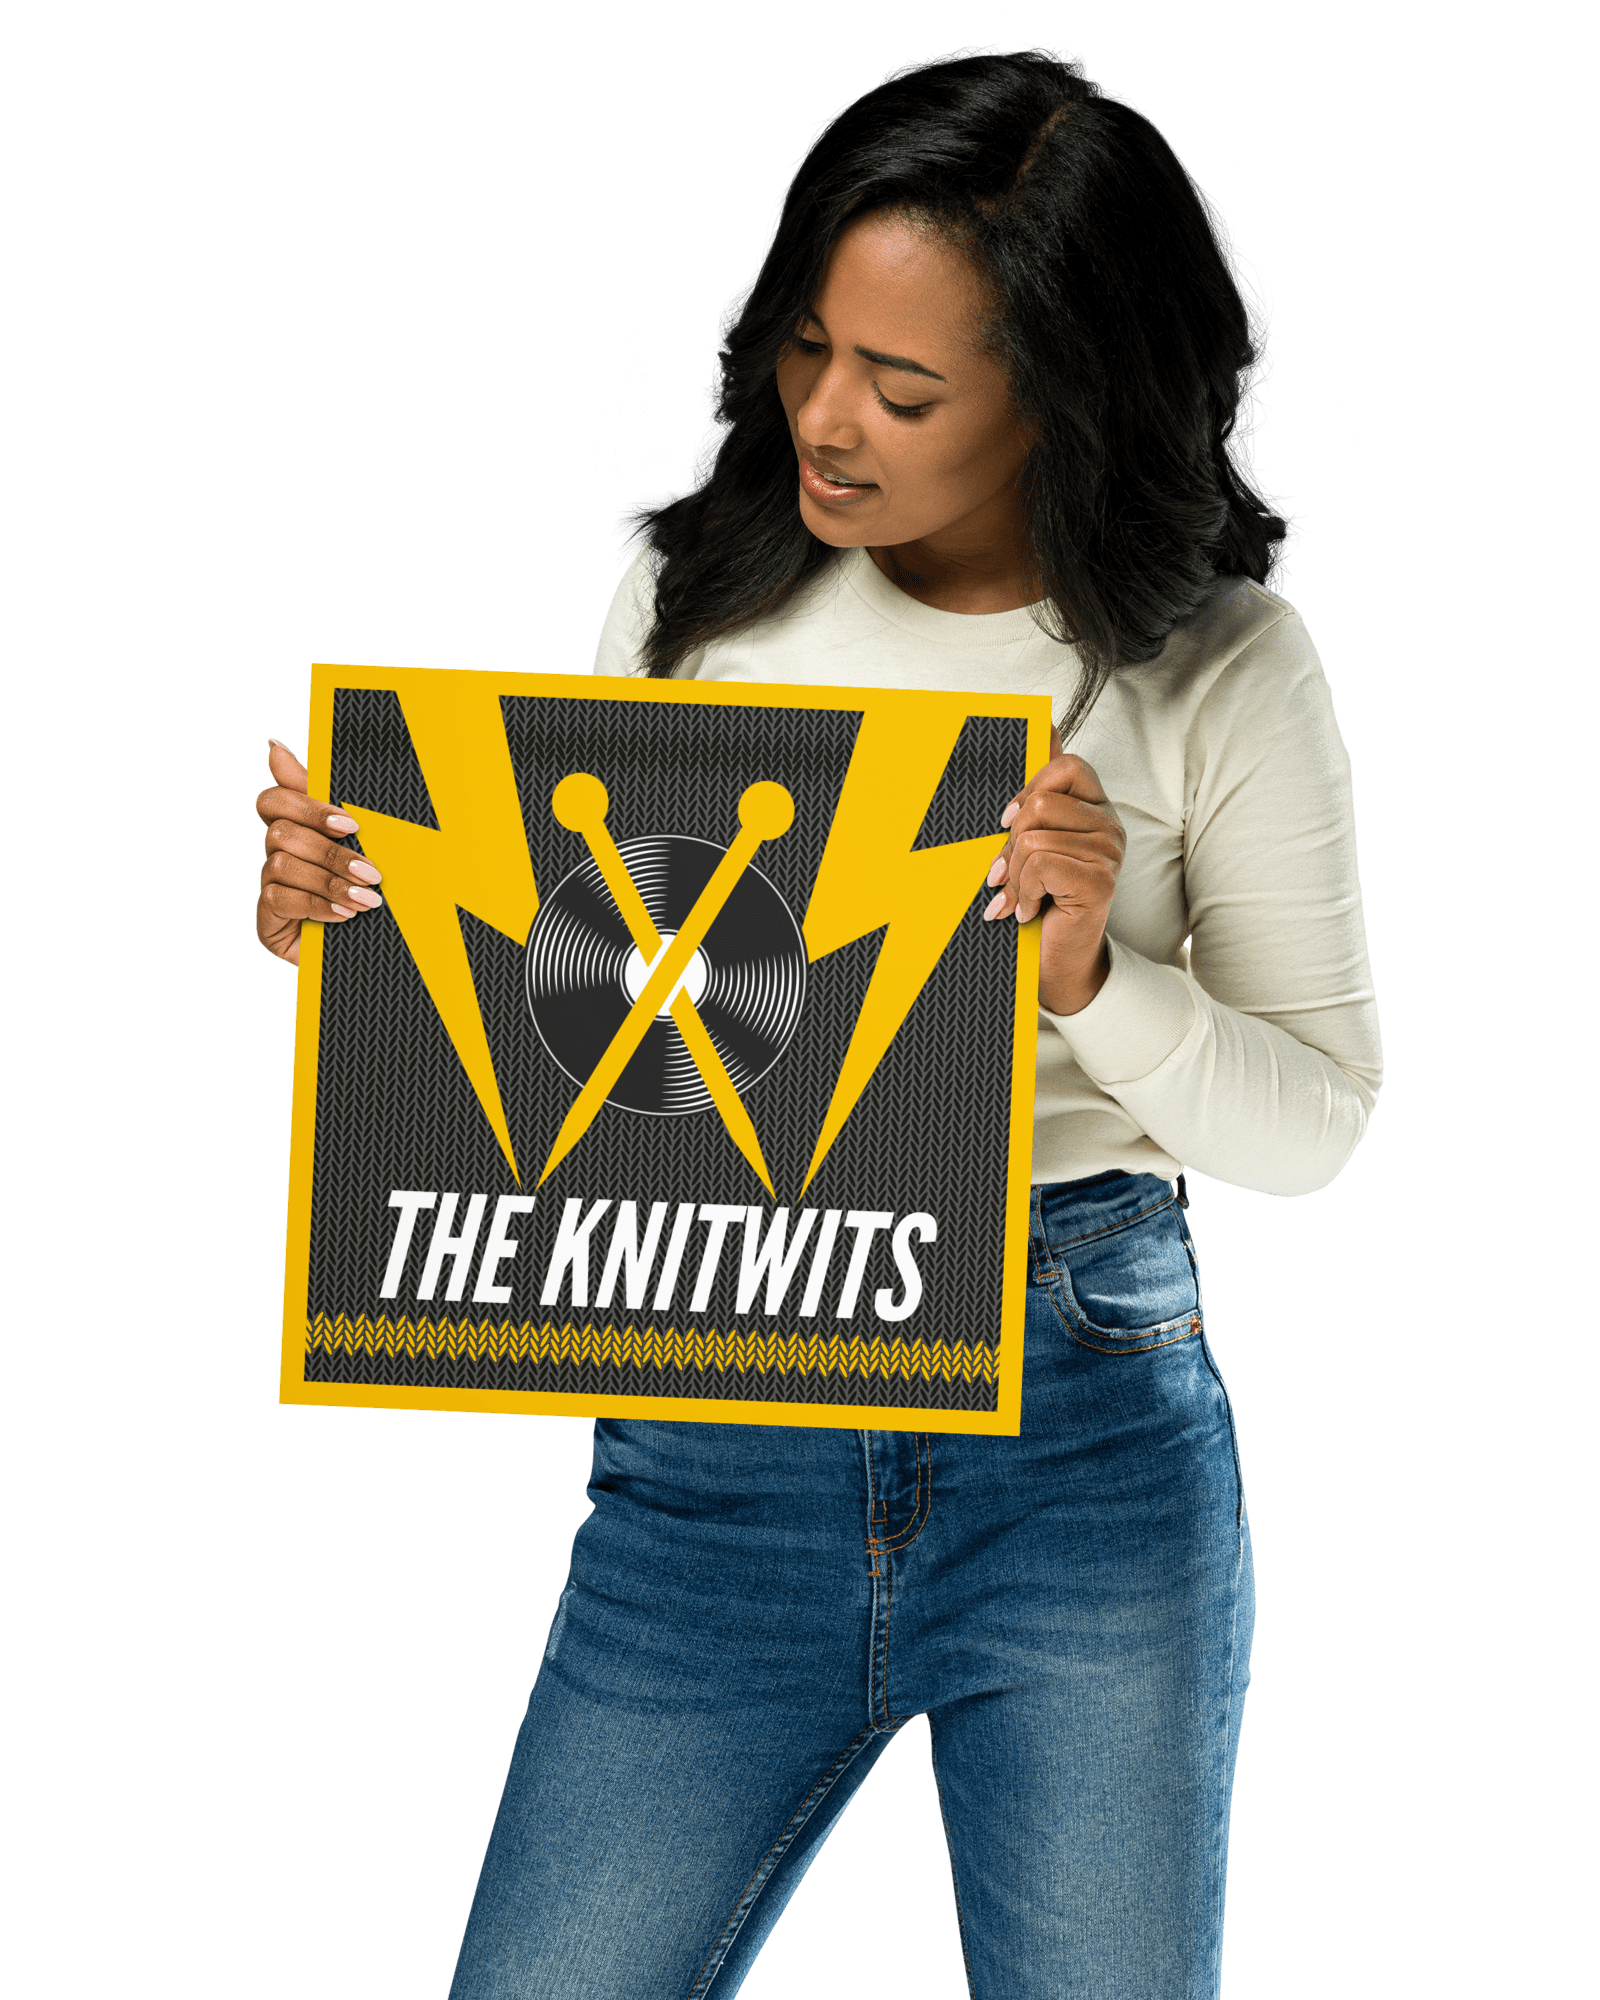 The Knitwits Poster 12″×12″ Posters, Prints, & Visual Artwork Jolly & Goode